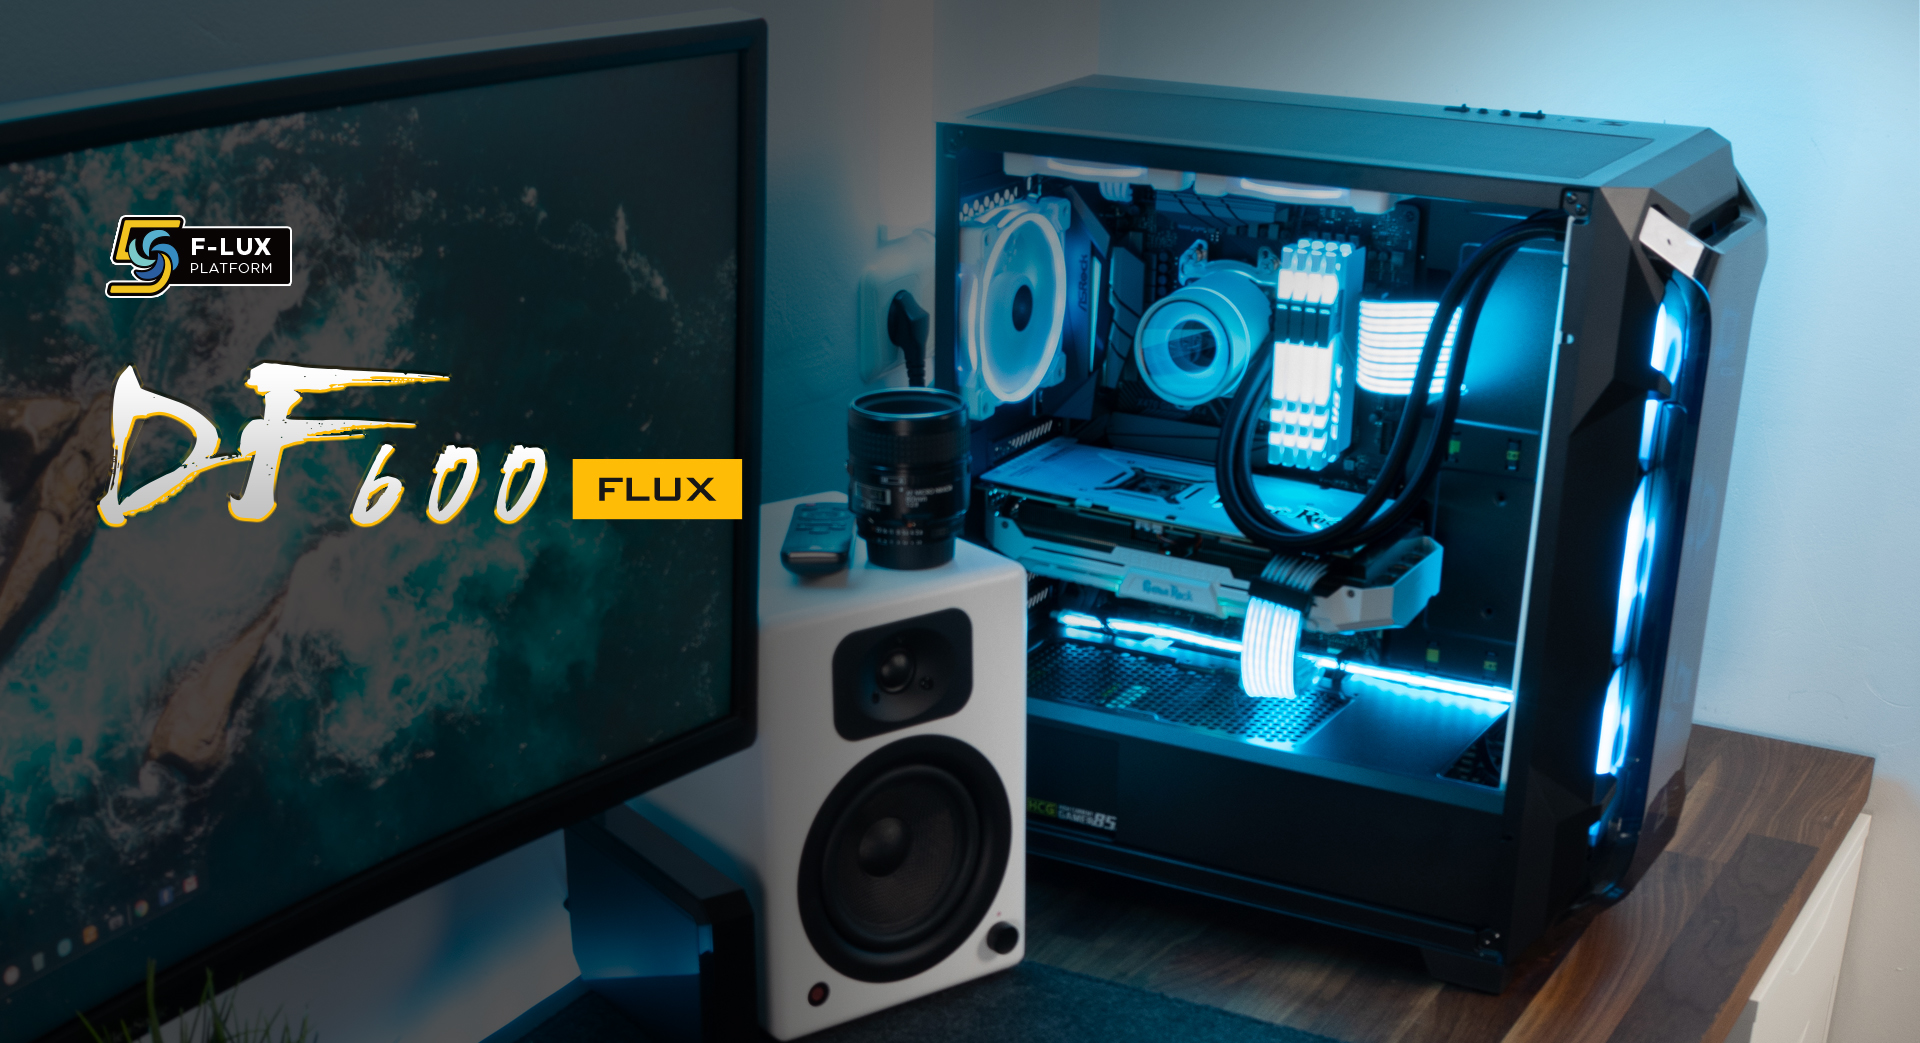 Antec Dark League DF600 FLUX, Mid-Tower ATX Gaming Case, FLUX Platform, 5 x 120mm Fans Included, ARGB & PWM Fan Controller, Tempered Glass Side Panel, 2 x USB3.0, High-End GPU Support -